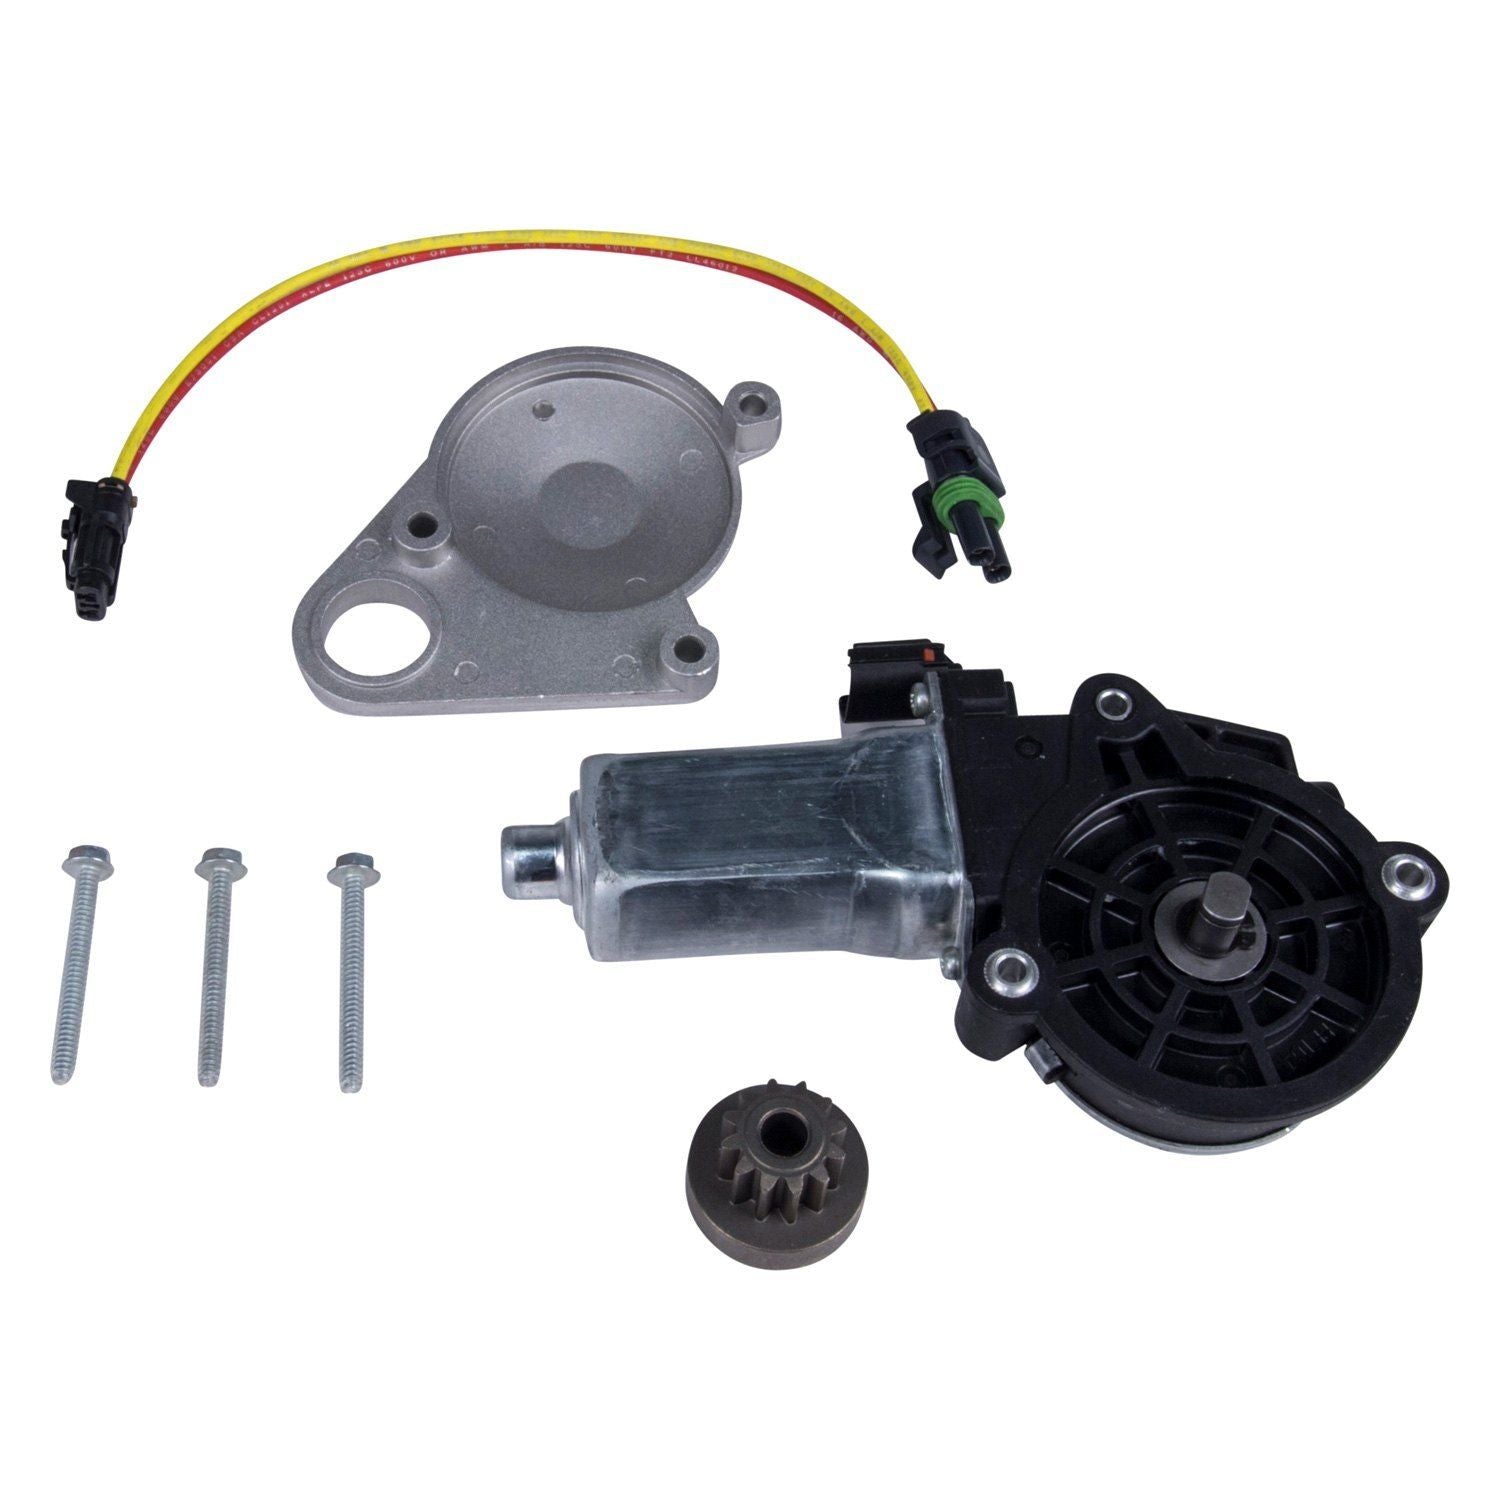 Lippert Components 379608 - Components for Entry Step Motor Replacement